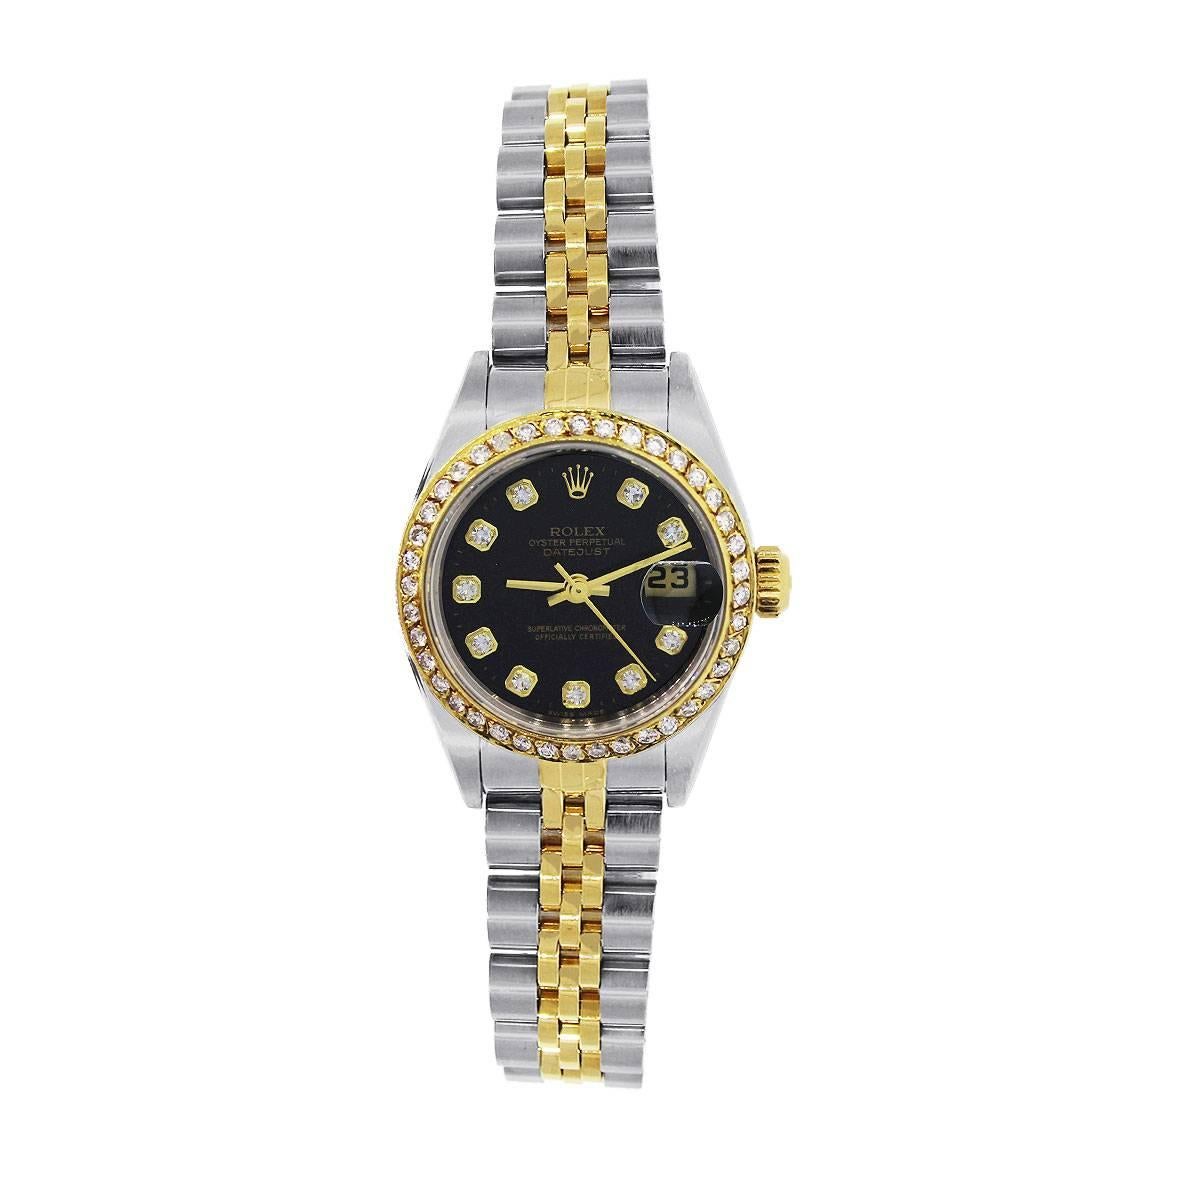 Brand: Rolex
Model: Datejust
MPN: 179173
Serial: “P”
Dial: Black Dial with Diamond markers, Date located at 3’o clock.
Case Measurements: 26mm
Bezel Details: 18k Yellow gold Diamond Fixed Bezel
Bracelet: Two Tone jubilee band
Clasp: Fold over